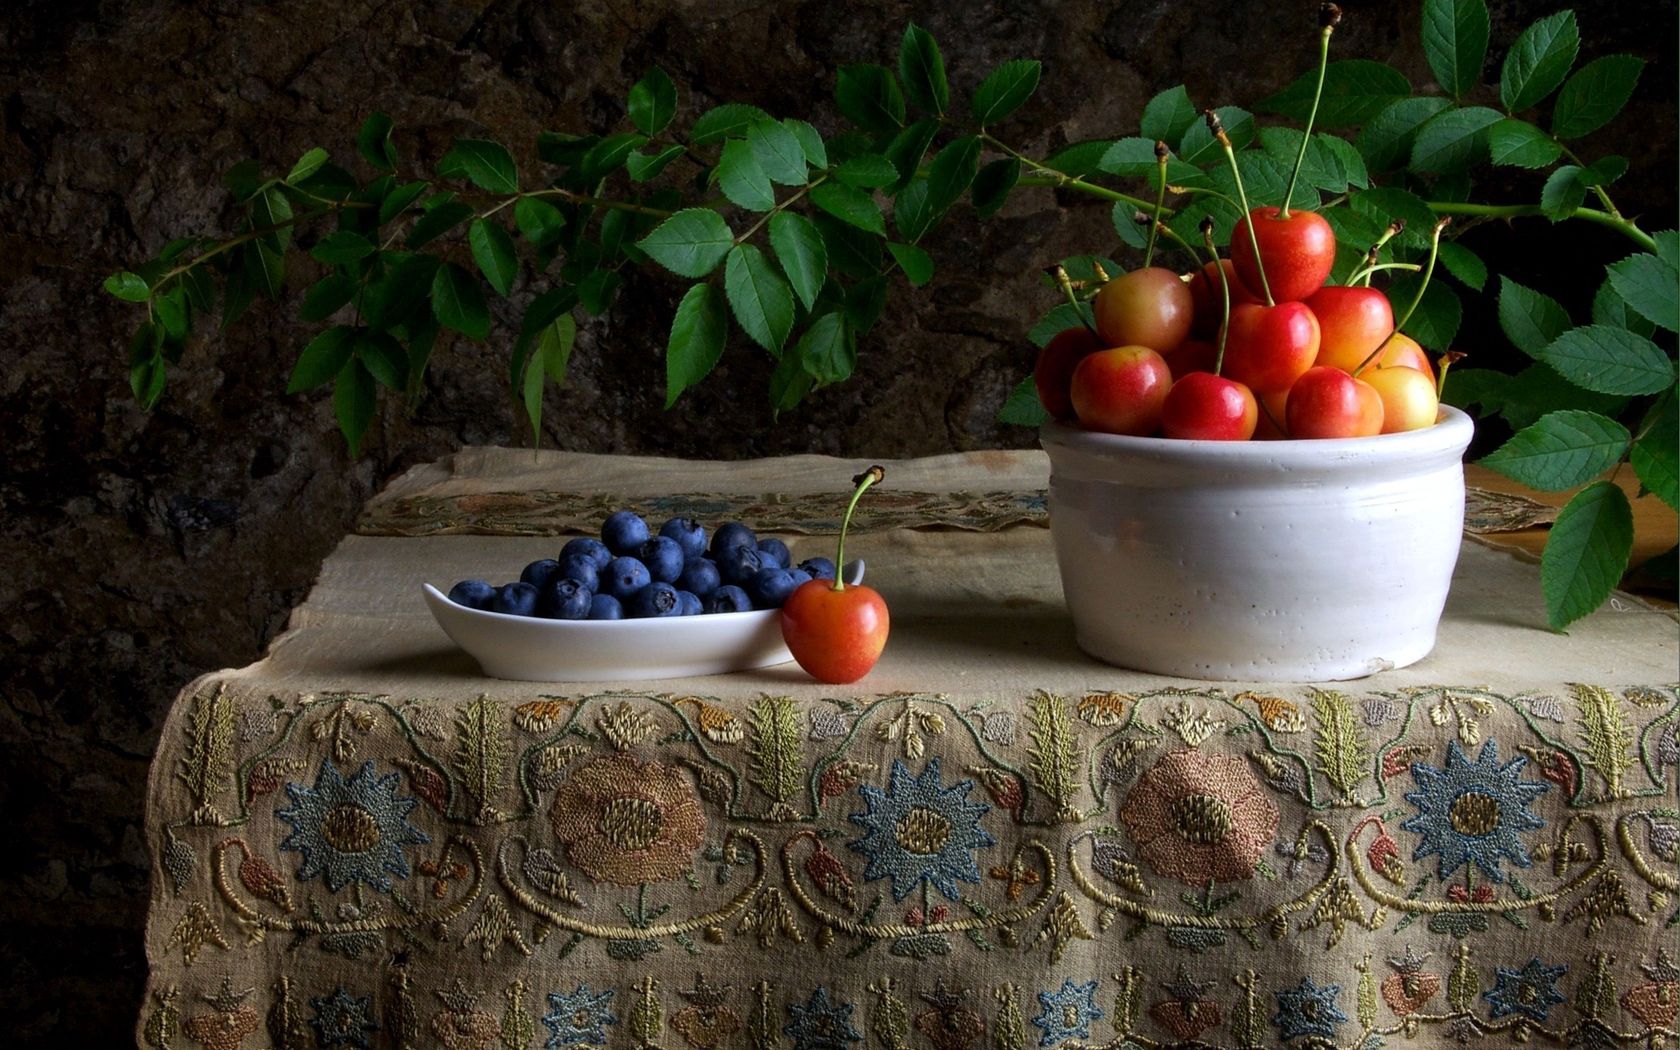 berries, table, tablecloth, bilberries, sweet cherry, branch, still life, food